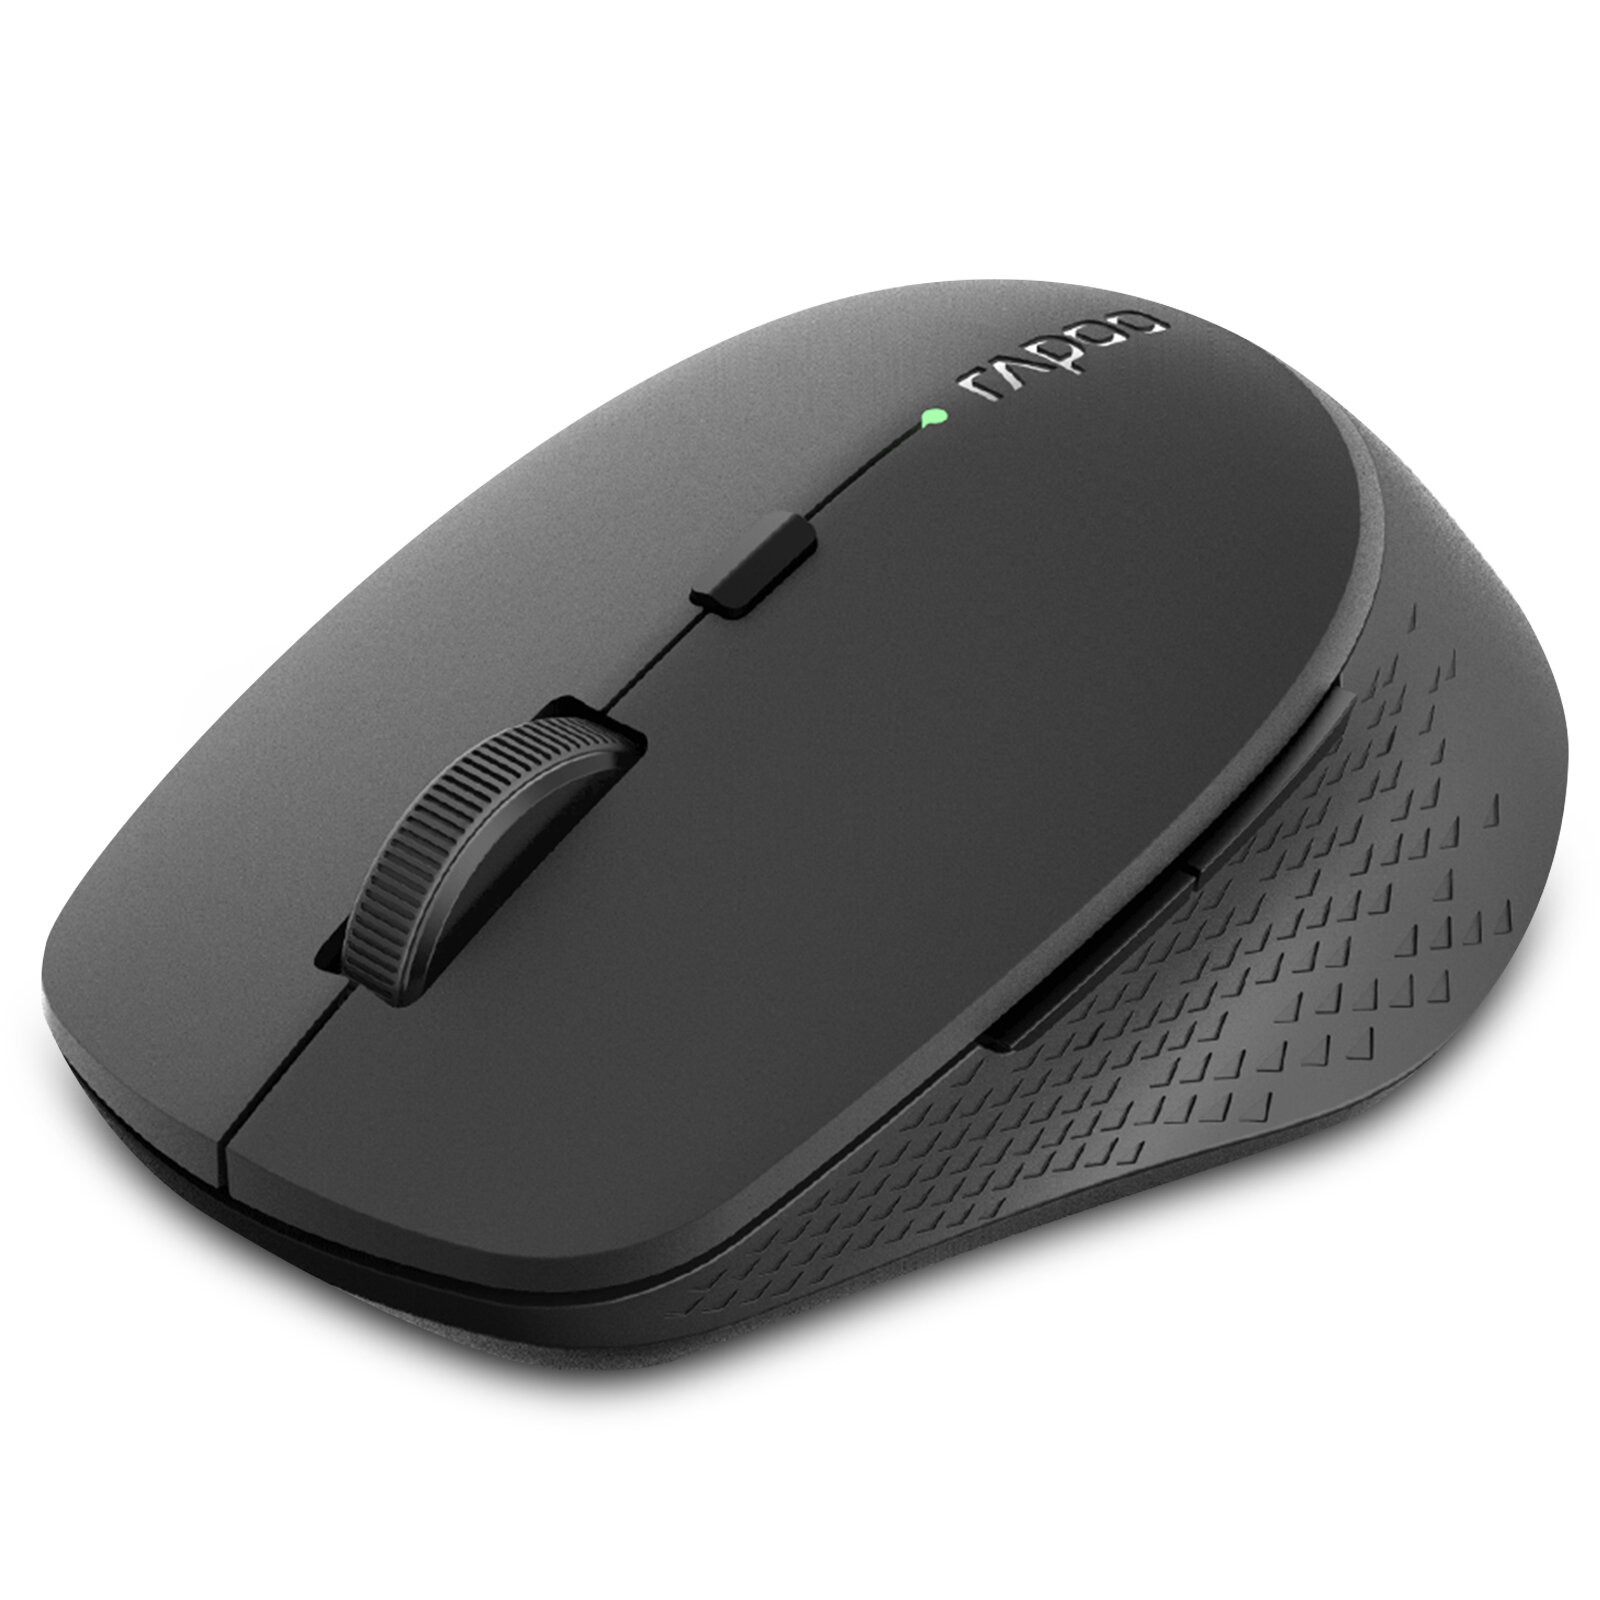 Rapoo M300G Silent Wireless Mouse Multi-mode Bluetooth Mouse Portable Optical Mice with Ergonomic Design Support up to 3